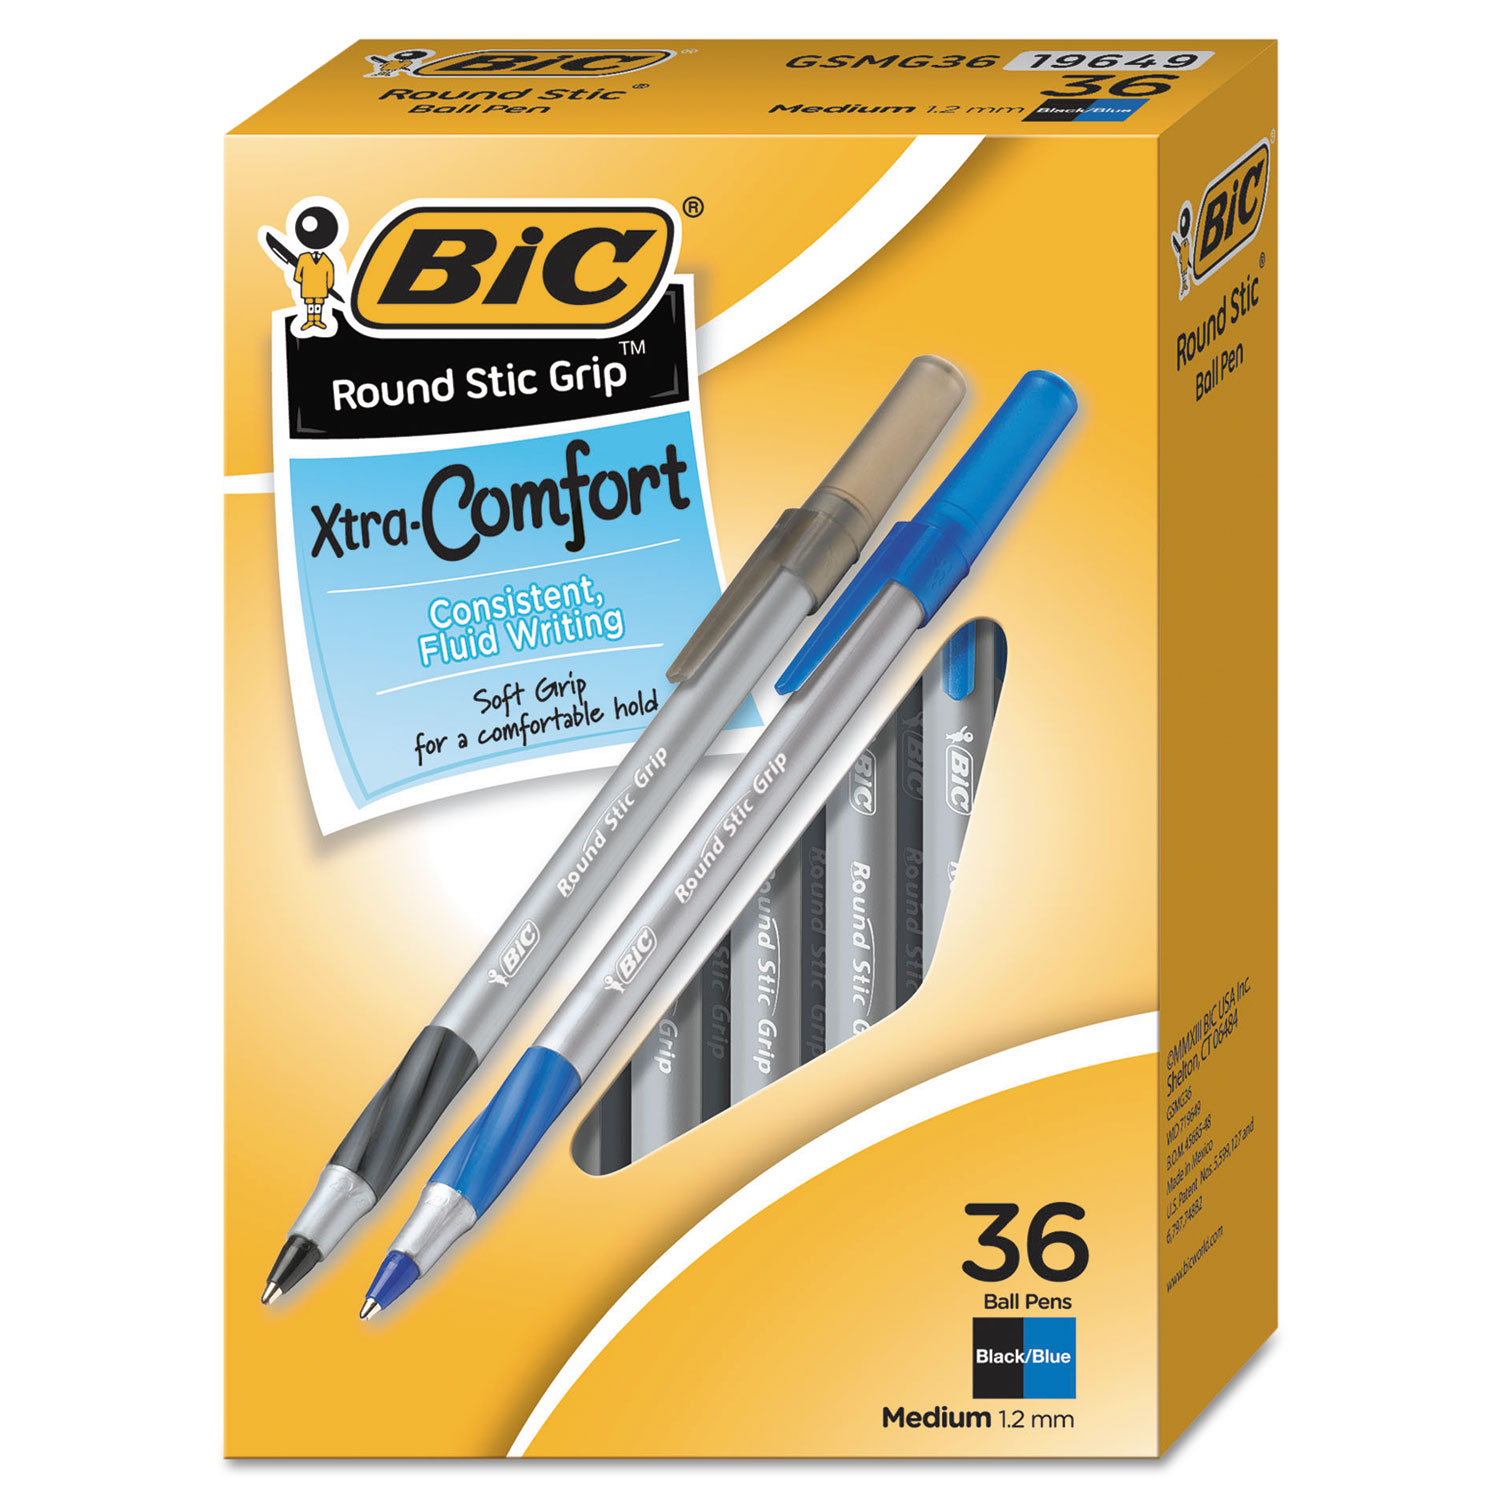  BIC GSMG361-AST Round Stic Grip Xtra Comfort Stick Ballpoint Pen, 1.2mm, Assorted Ink/Barrel, 36/Pack (BICGSMG361AST) 